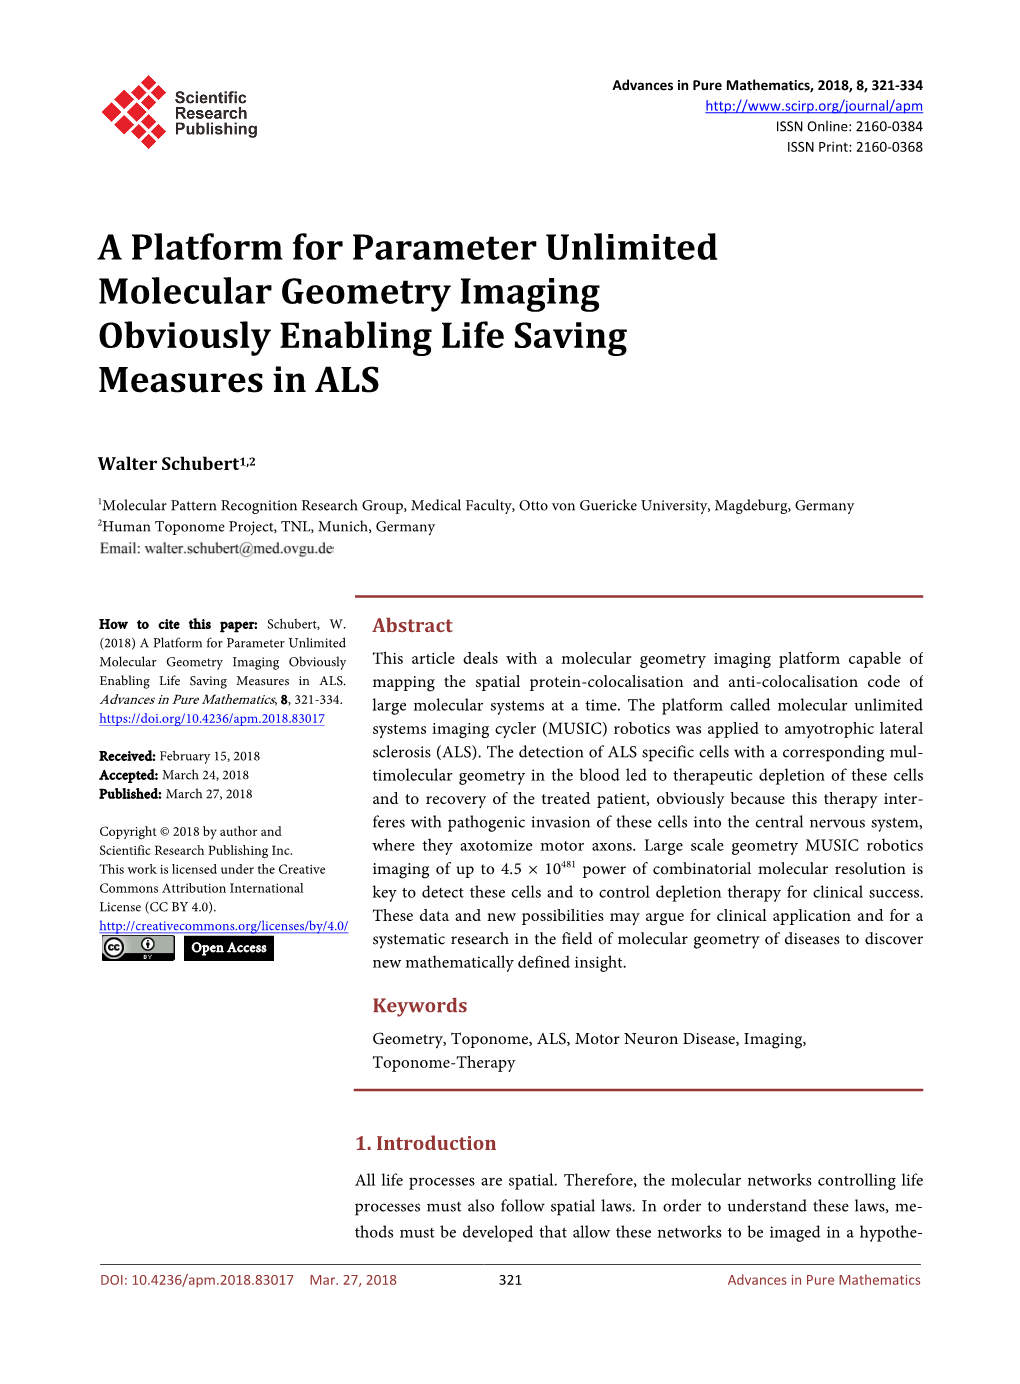 A Platform for Parameter Unlimited Molecular Geometry Imaging Obviously Enabling Life Saving Measures in ALS